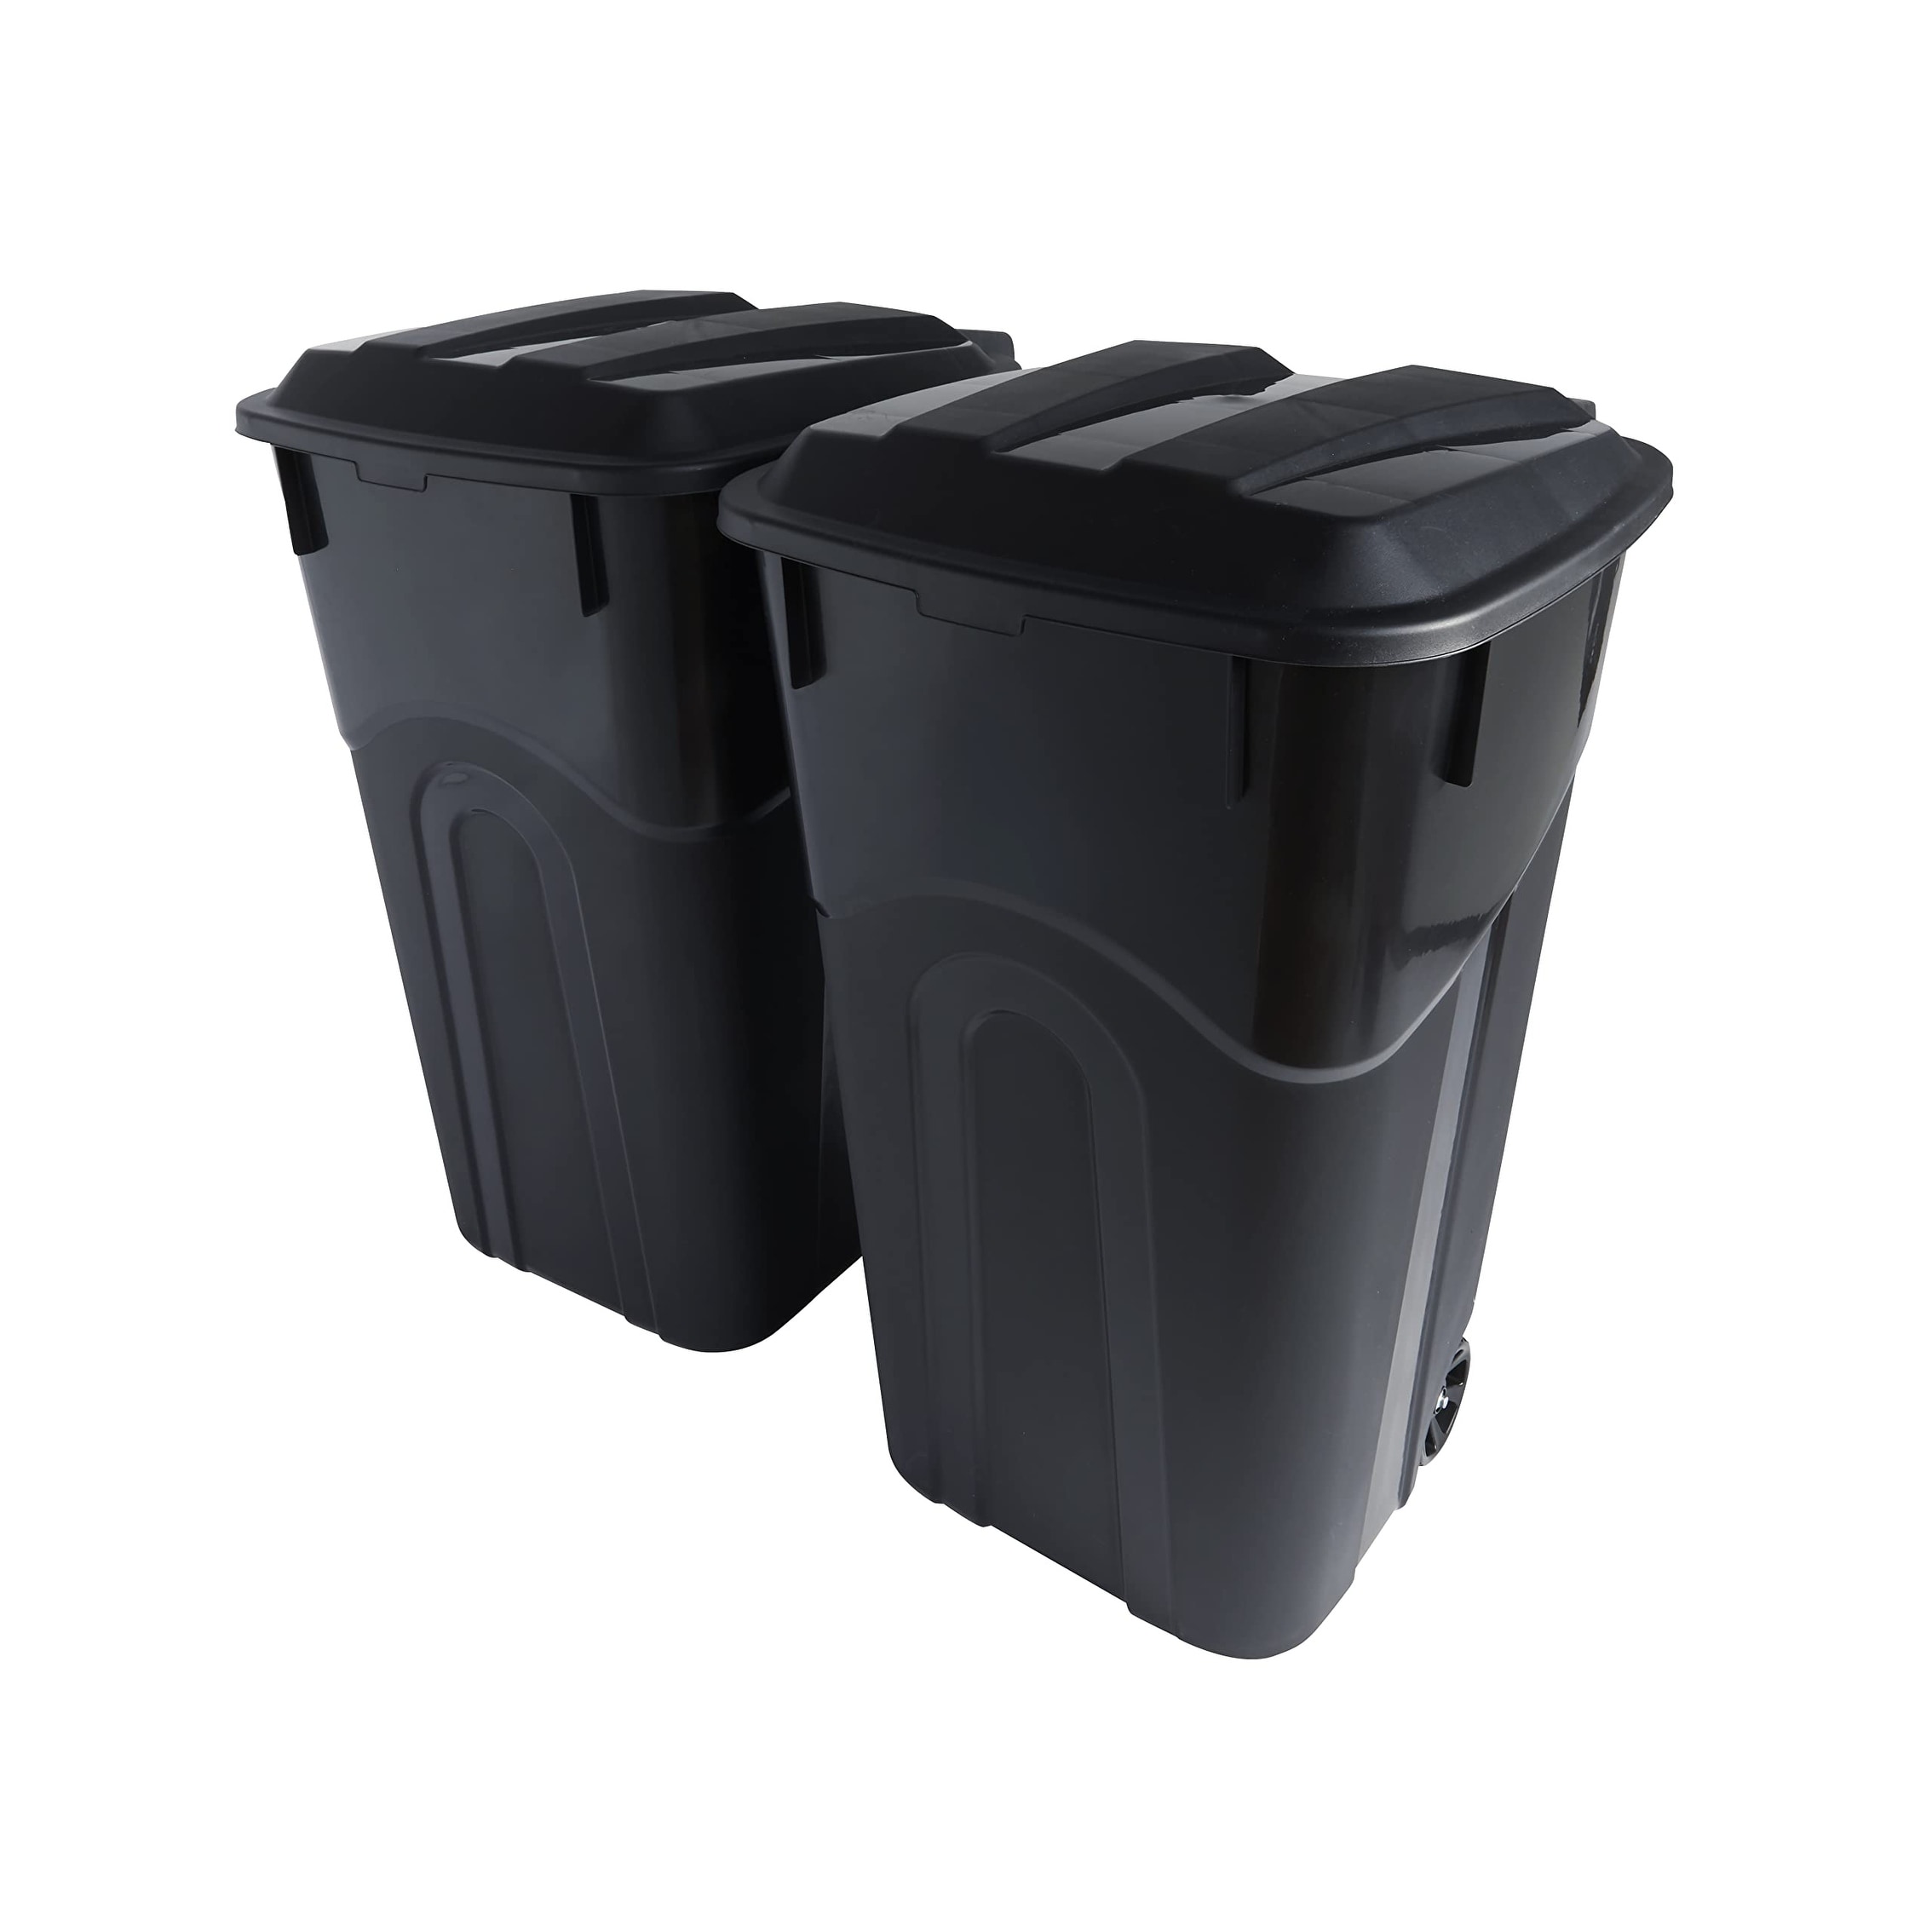 https://ak1.ostkcdn.com/images/products/is/images/direct/c175f37cde0282a3944c6d19525bcc79a182ff26/32-Gallon-Wheeled-Outdoor-Garbage-Can-with-Attached-Snap-Lock-Lid-and-Handles%2C-Perfect-Backyard%2C-Deck%2C-or-Garage-Trash-Can%2C-2pcs.jpg